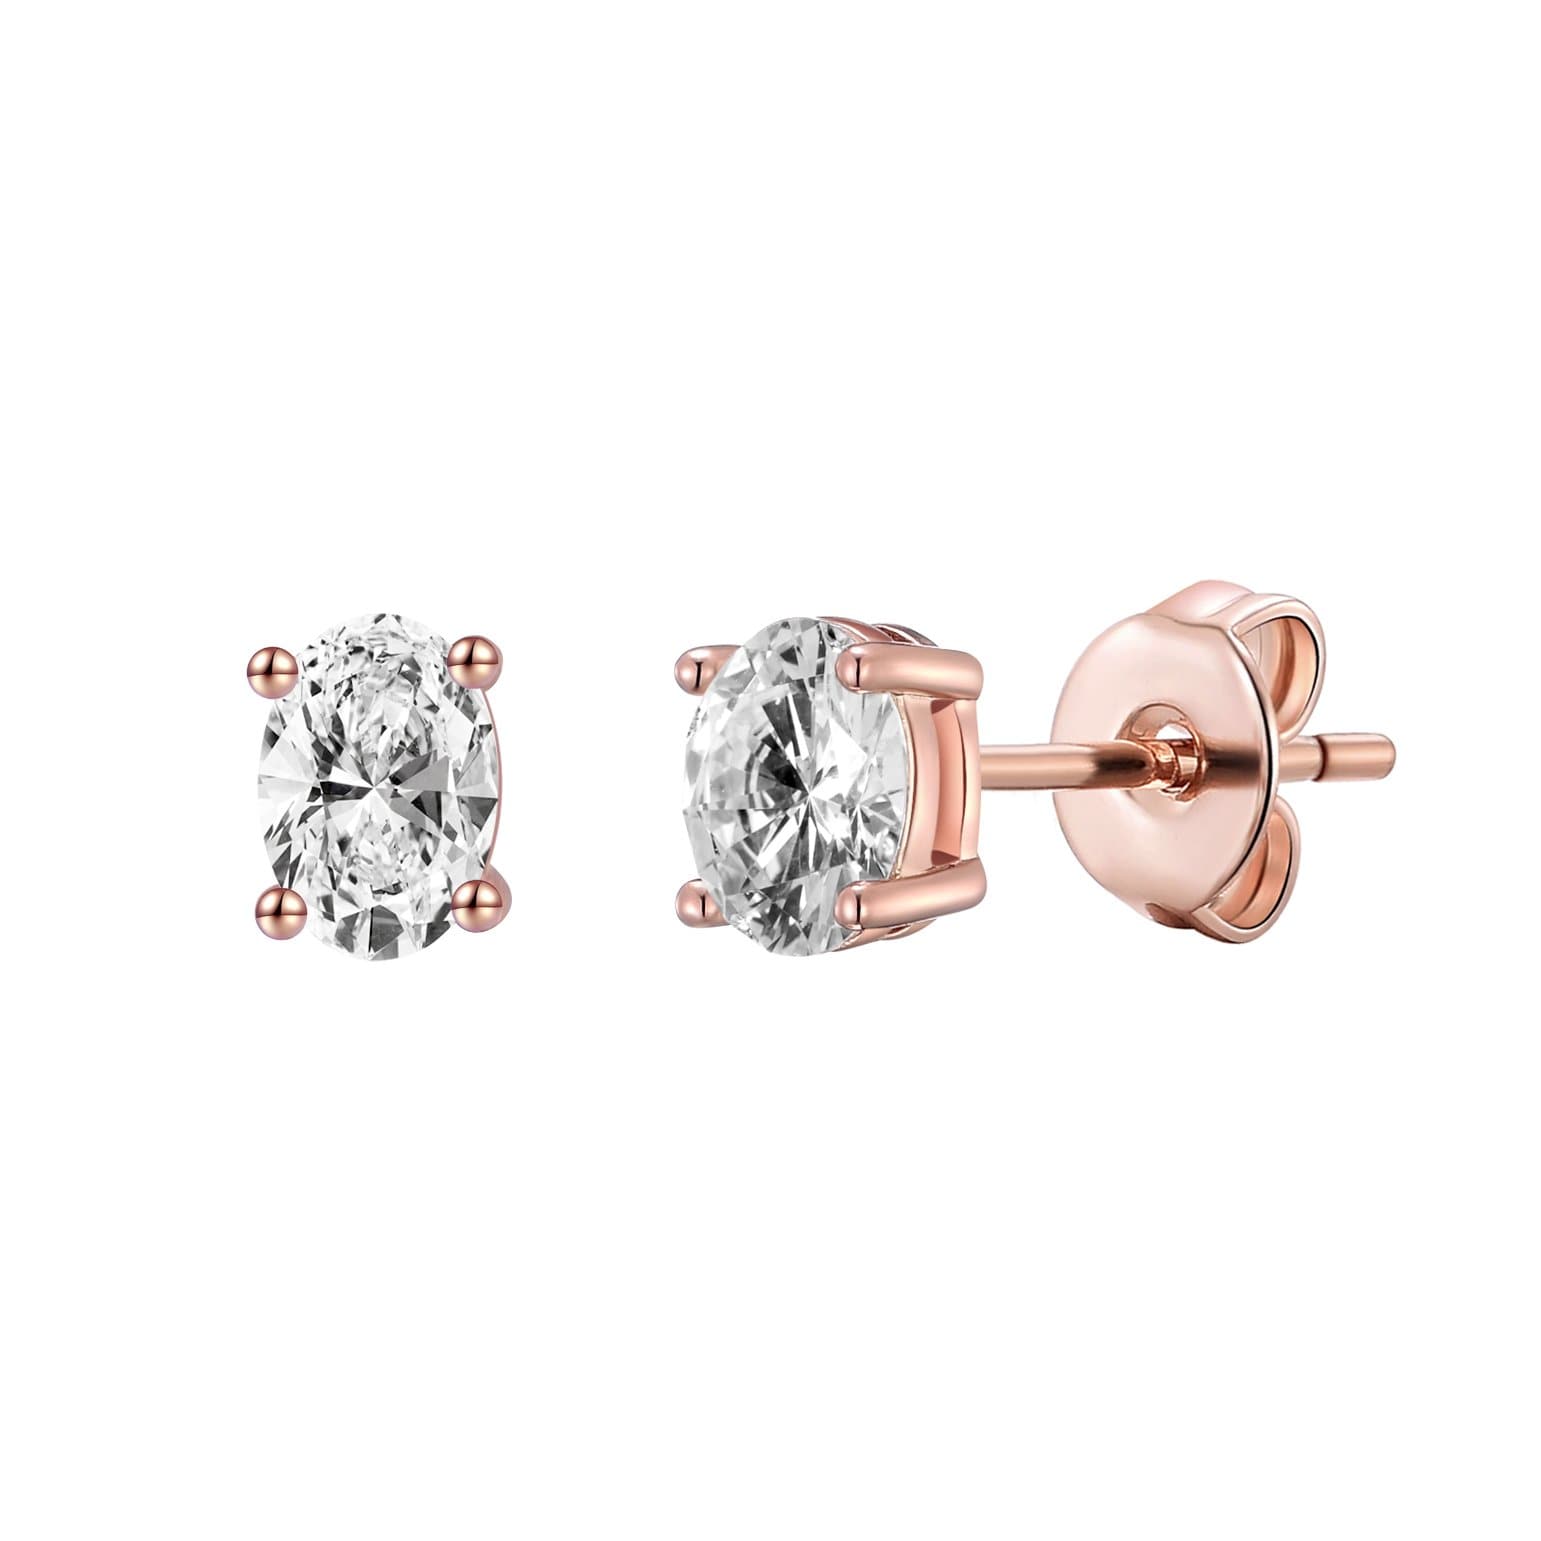 Rose Gold Plated Oval Earrings Created with Zircondia® Crystals by Philip Jones Jewellery